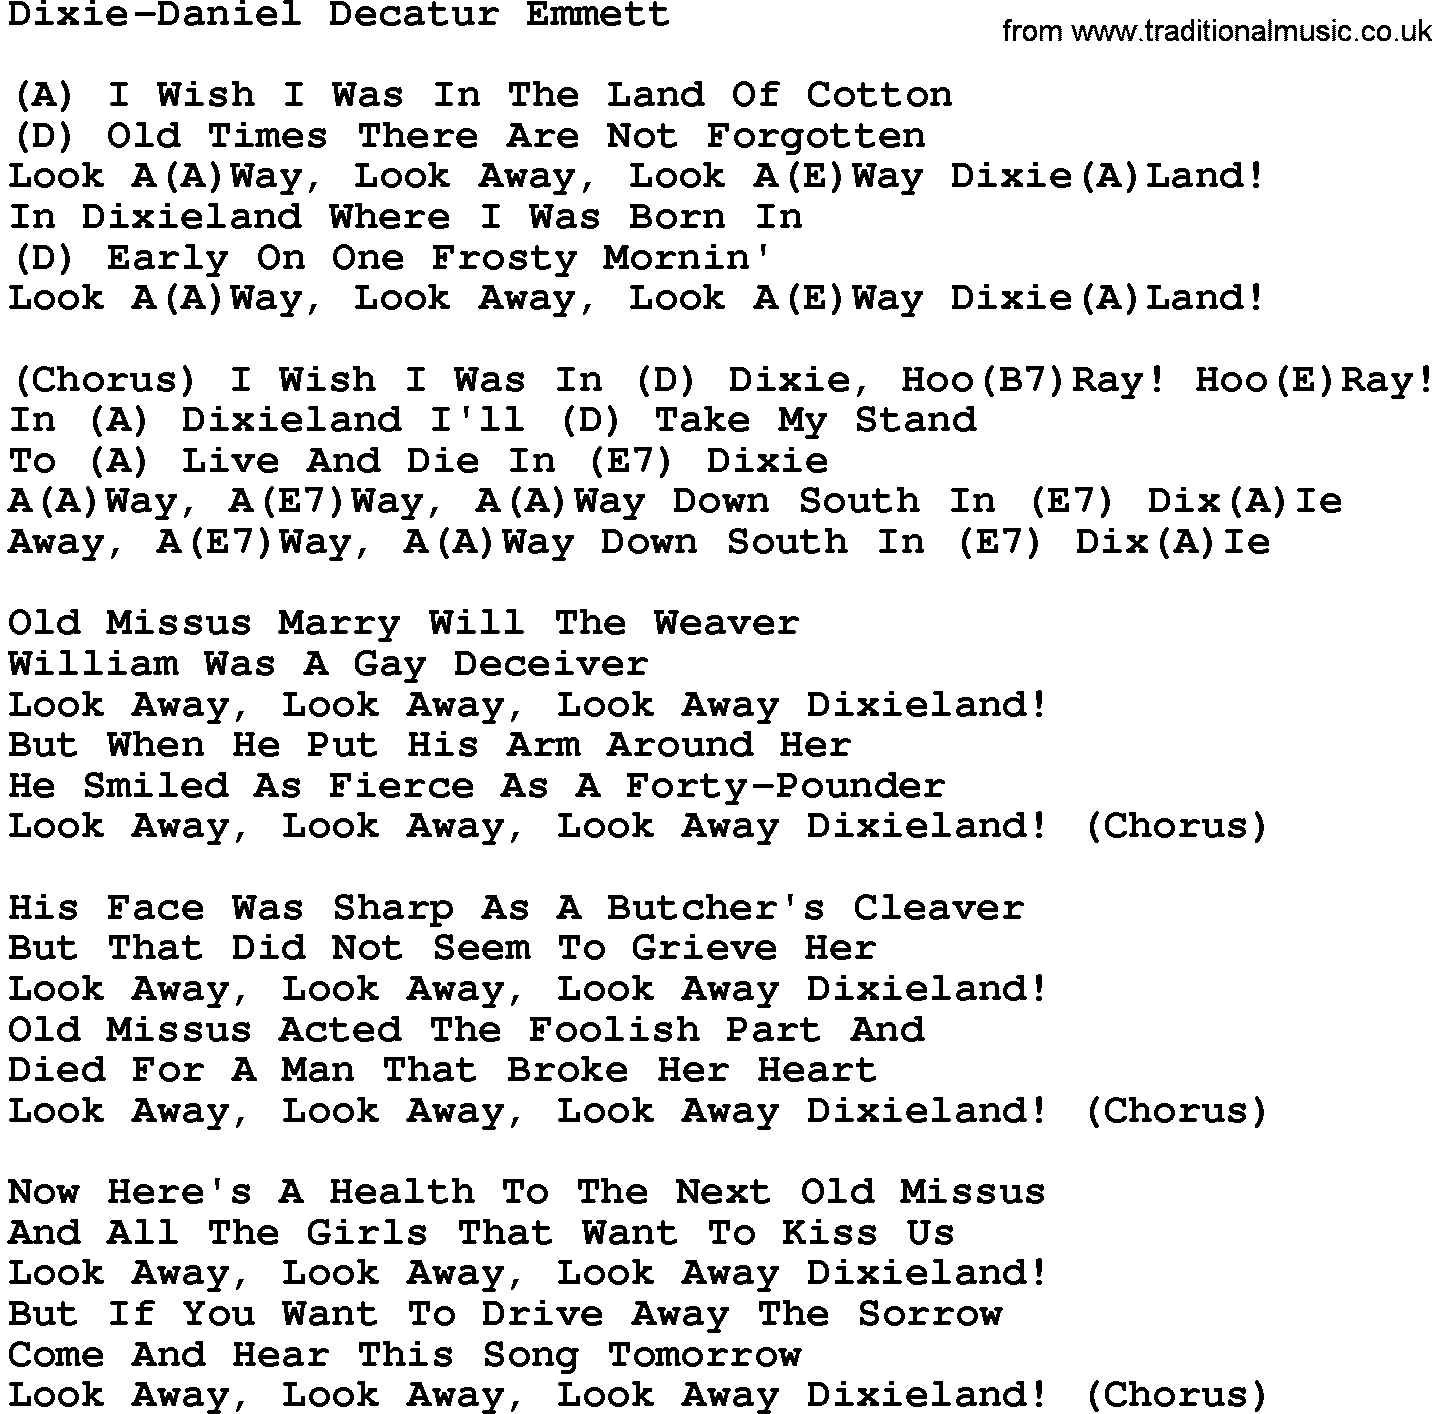 Country music song: Dixie-Daniel Decatur Emmett lyrics and chords